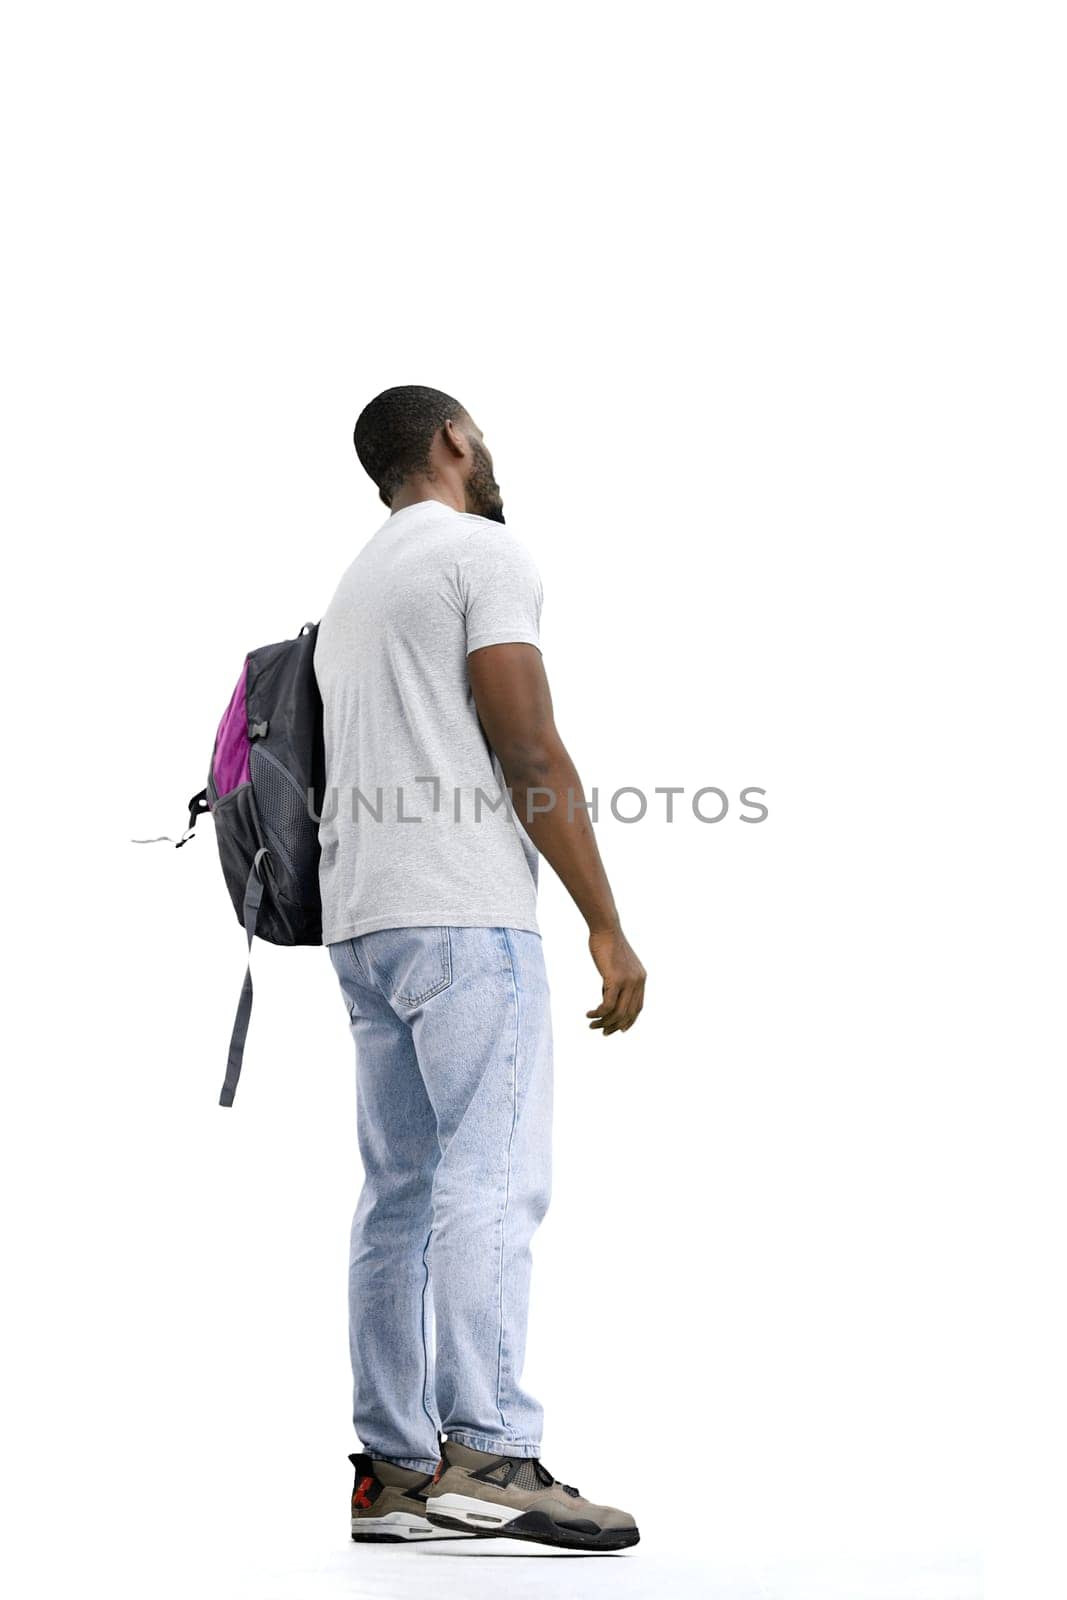 A man, full-length, on a white background, with a backpack.